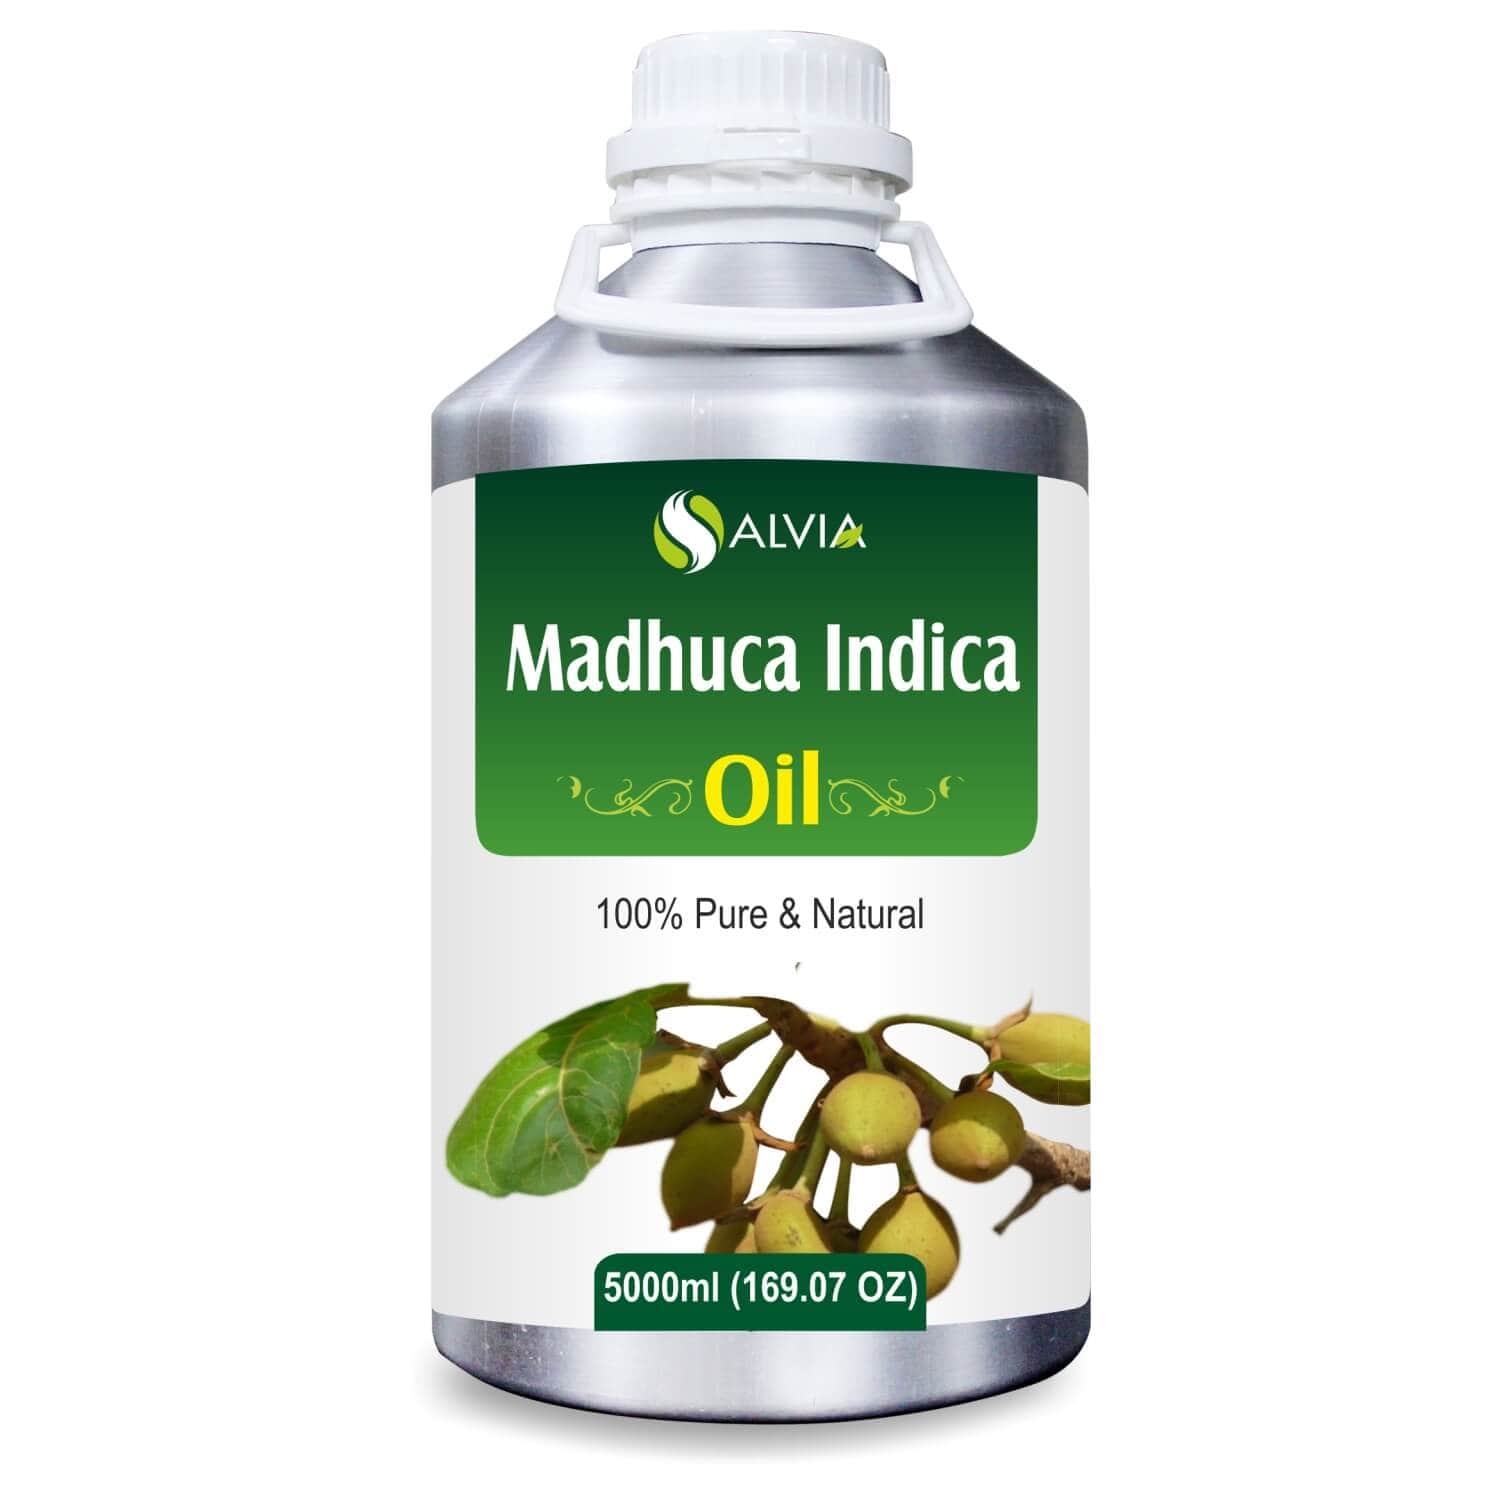 Salvia Natural Carrier Oils 5000ml Madhuca Indica Oil (Bassia Latifolia) 100% Pure & Natural Carrier Oil Improves Skin Health, Mosquito Repellent, Reduces Joint Pain